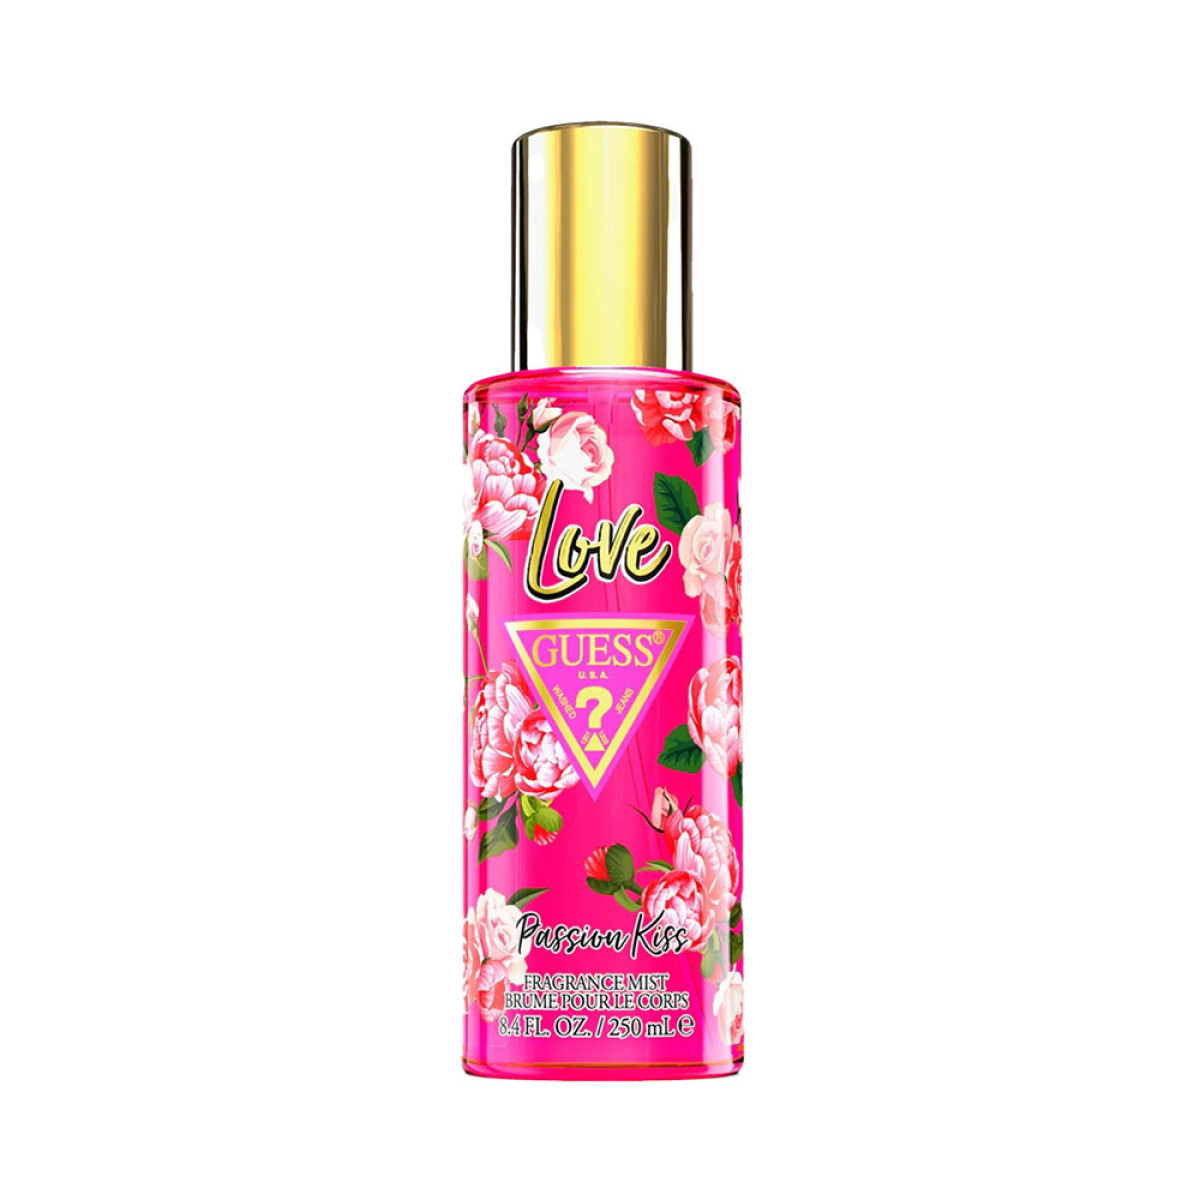 GUESS LOVE PASSION KISS 250 ML